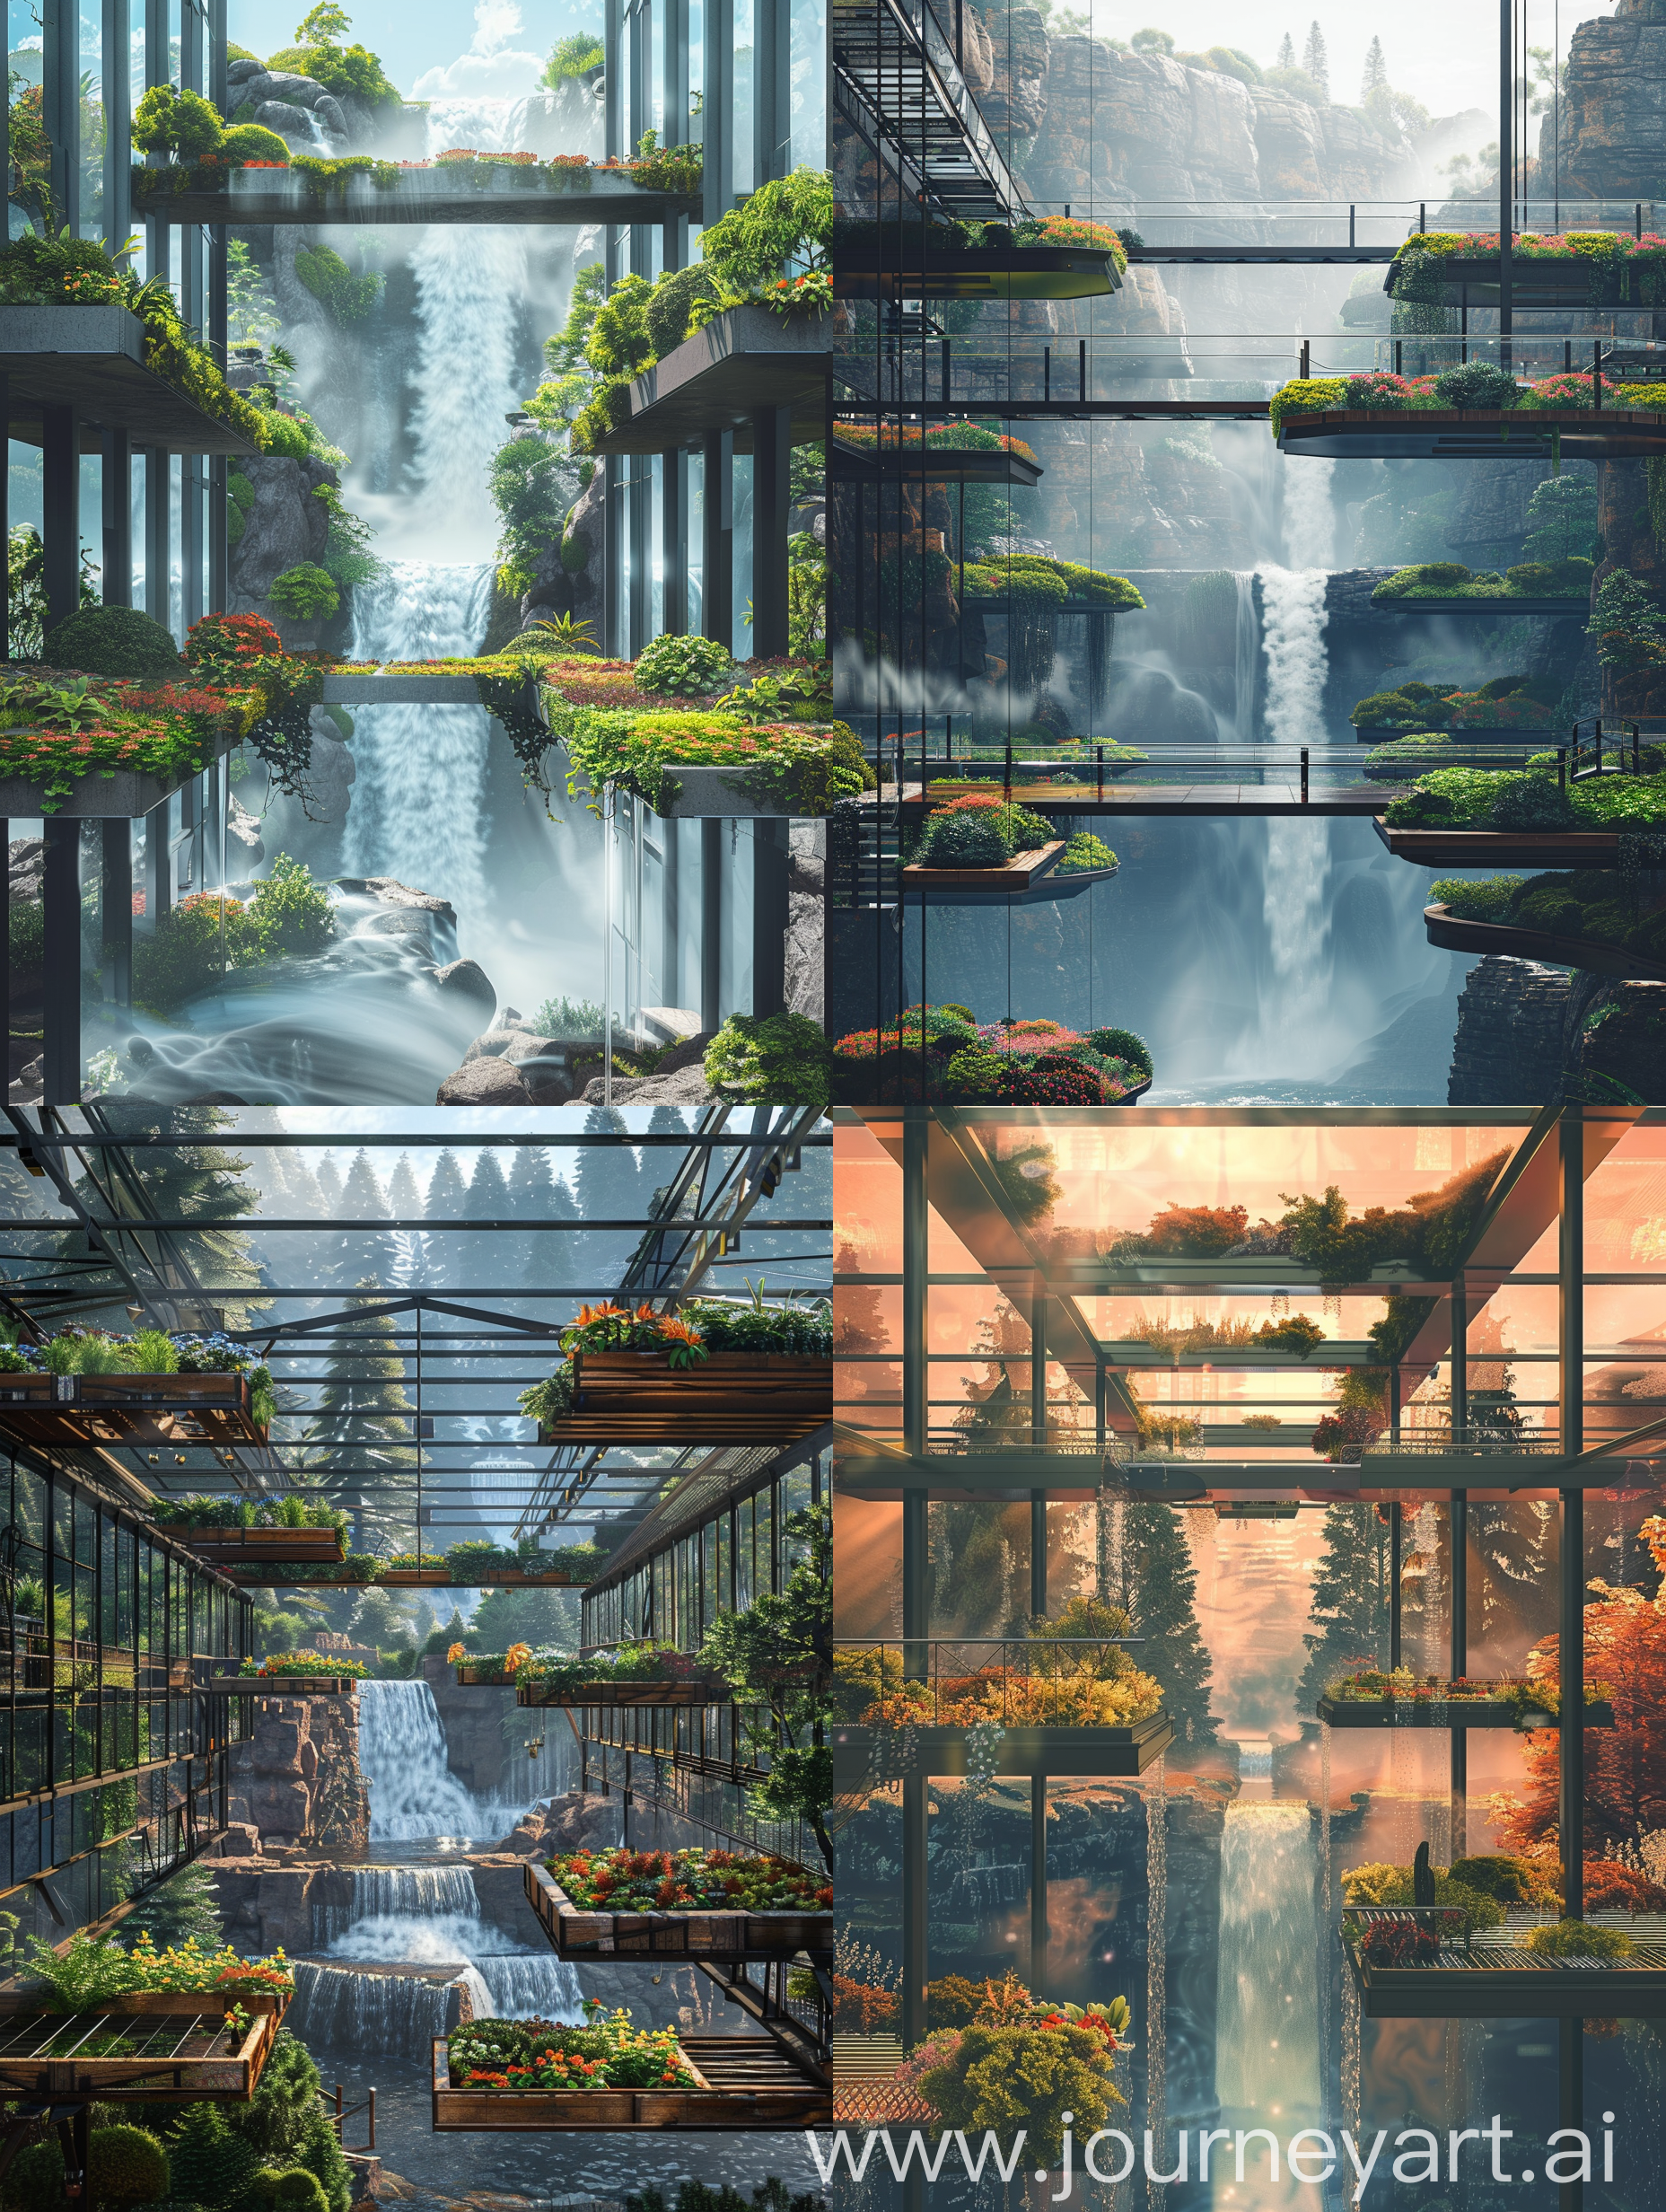 a realistic and high quality immersive photo of a 20th century style glashouse with suspended and independent floating platforms gardens on each of them with waterfall flowing between, point of view from a platform,photorealistic, professional quality light, professional focus, professional colors, post-processed and edited by experienced artist, long exposure, sharp focus